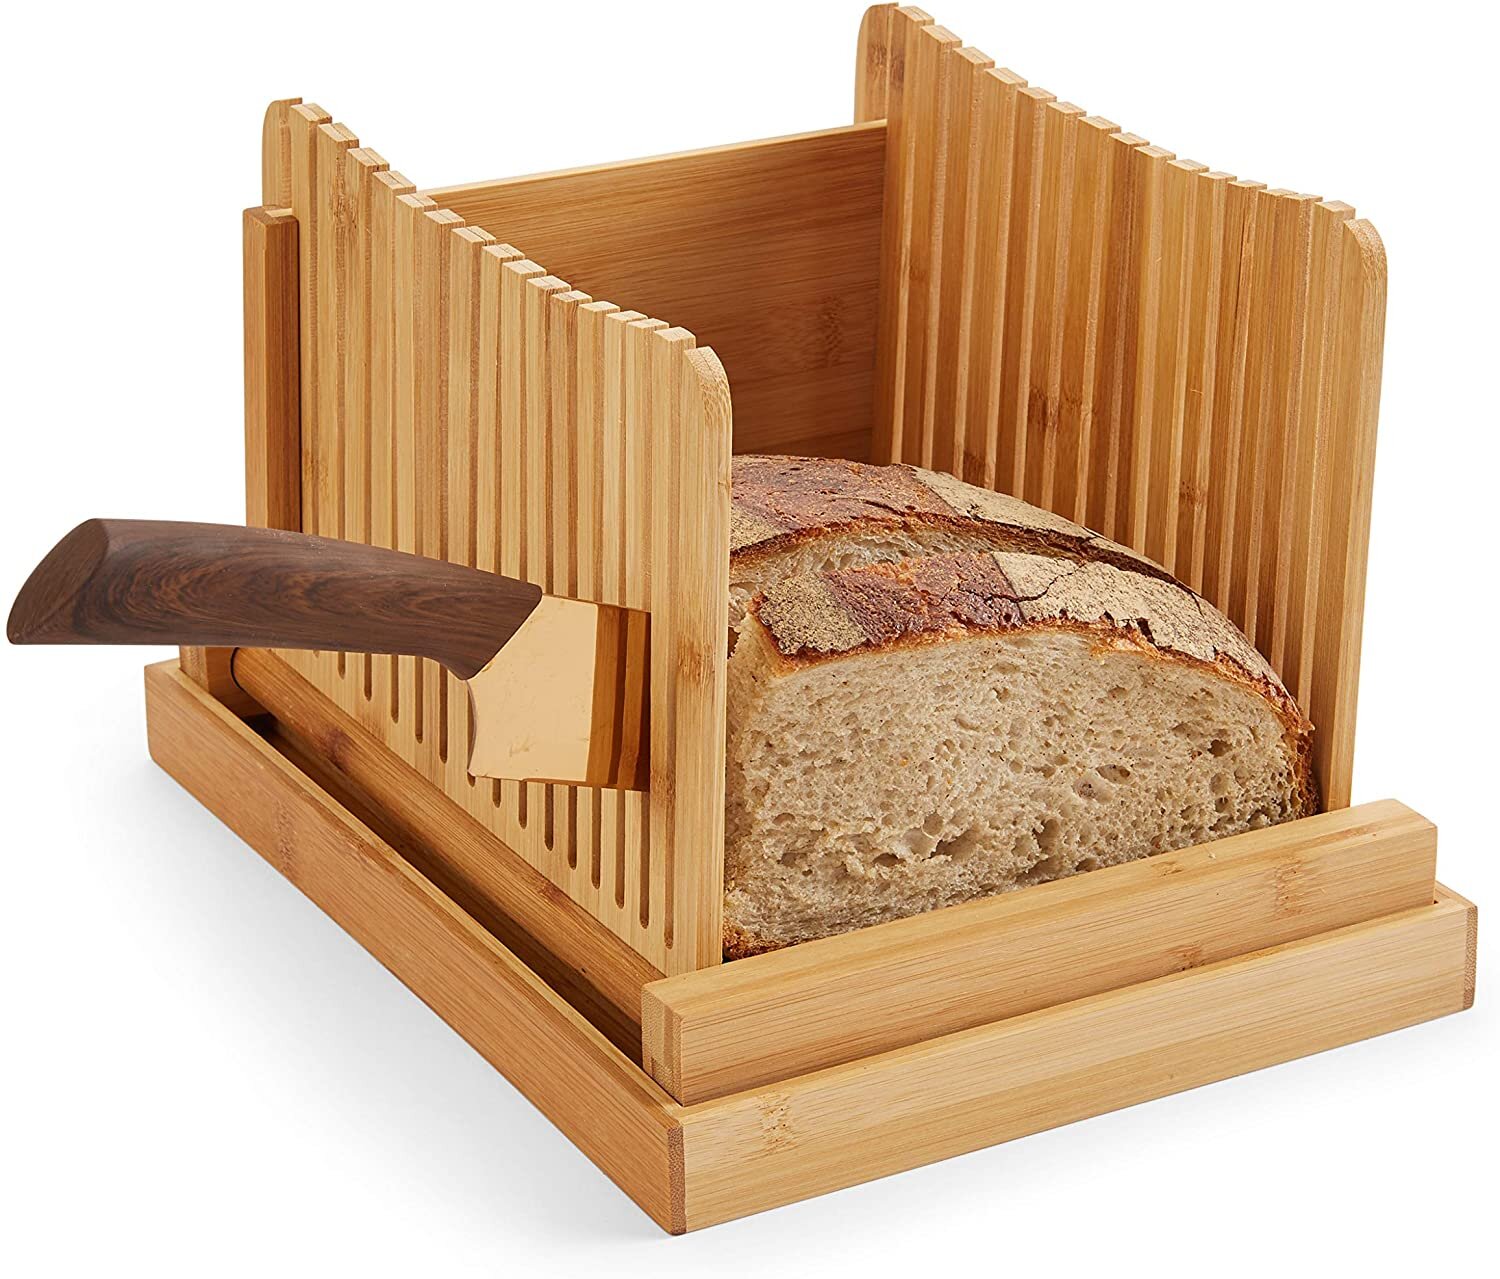 Bamboo Bread Slicer - Adjustable, Compact, Collapsible, Slicing